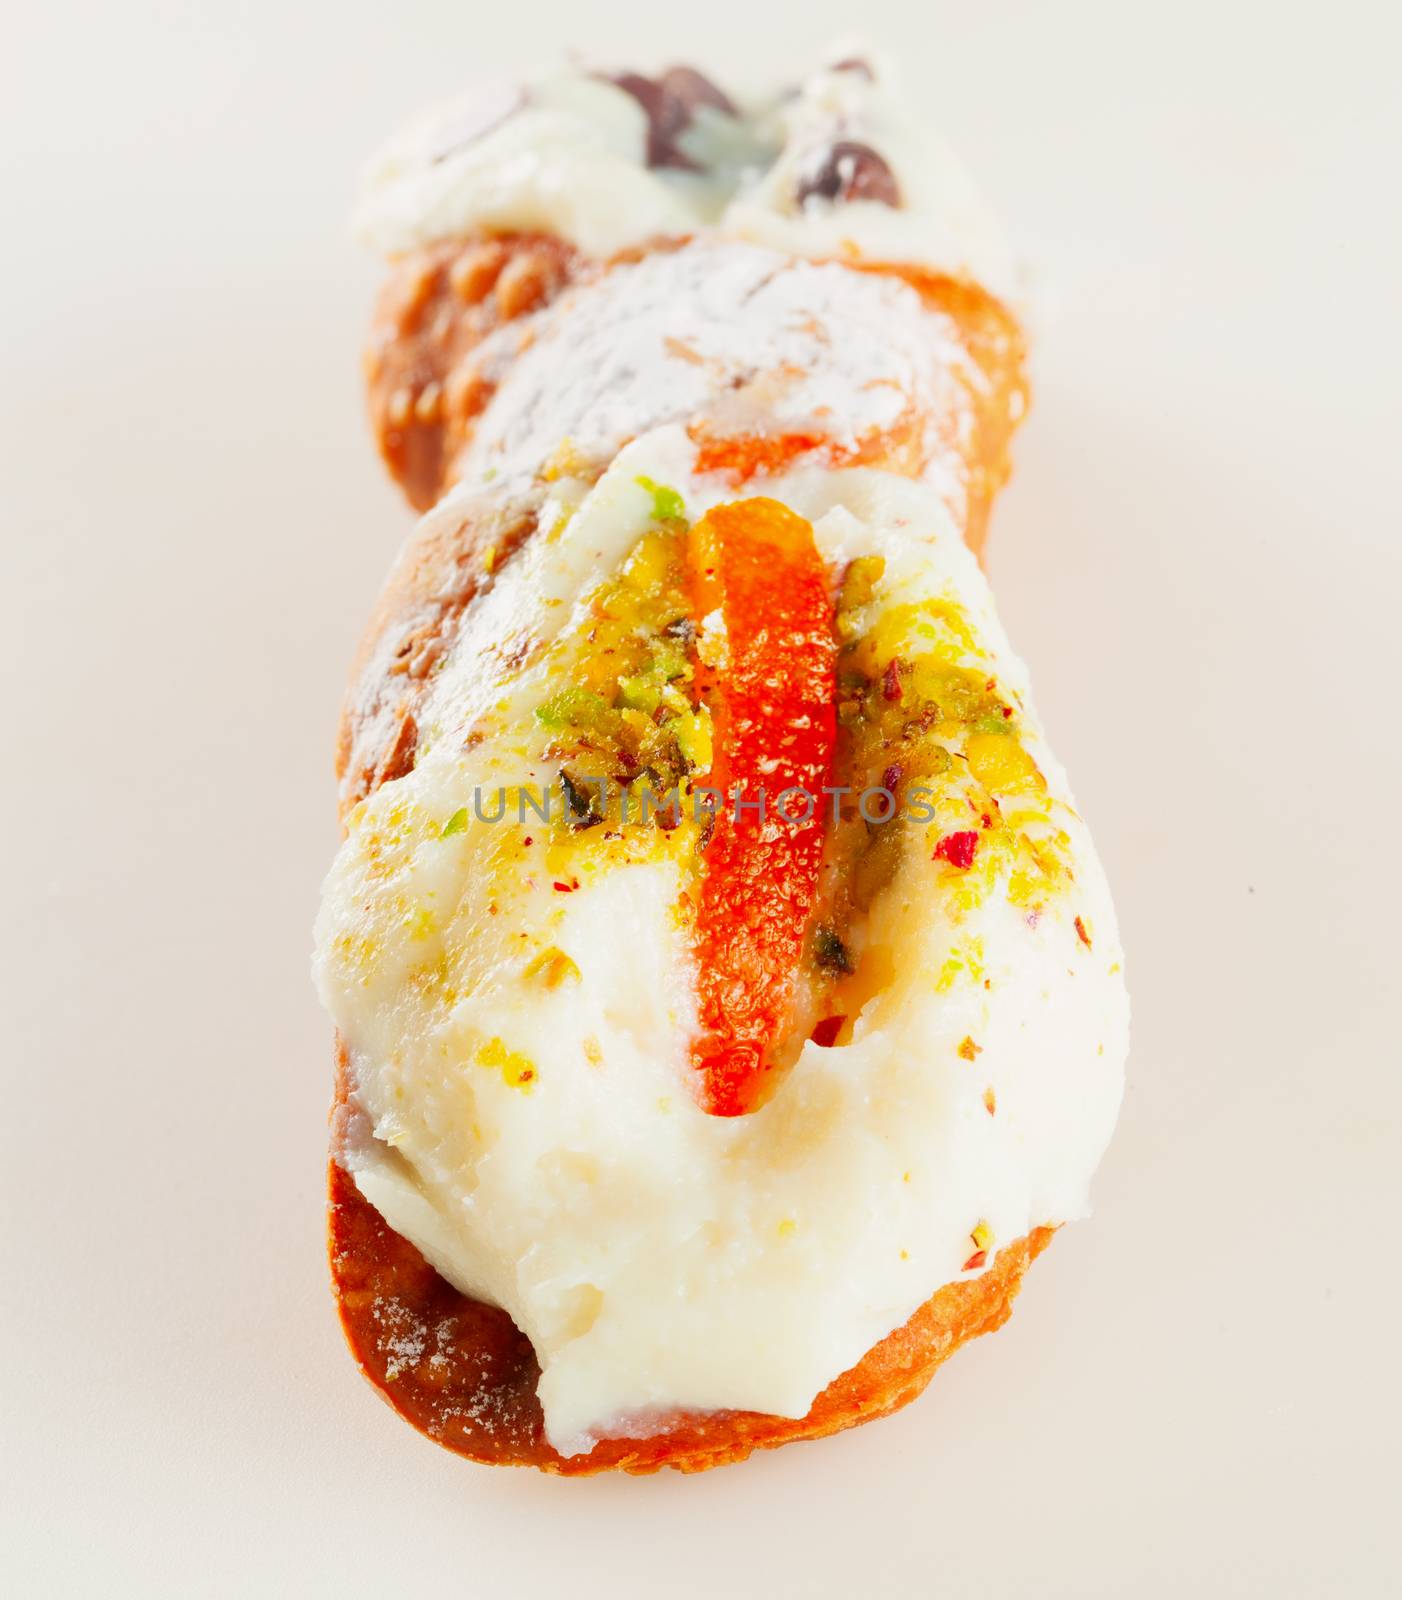 Typical sicilian cannolo, lying over white background